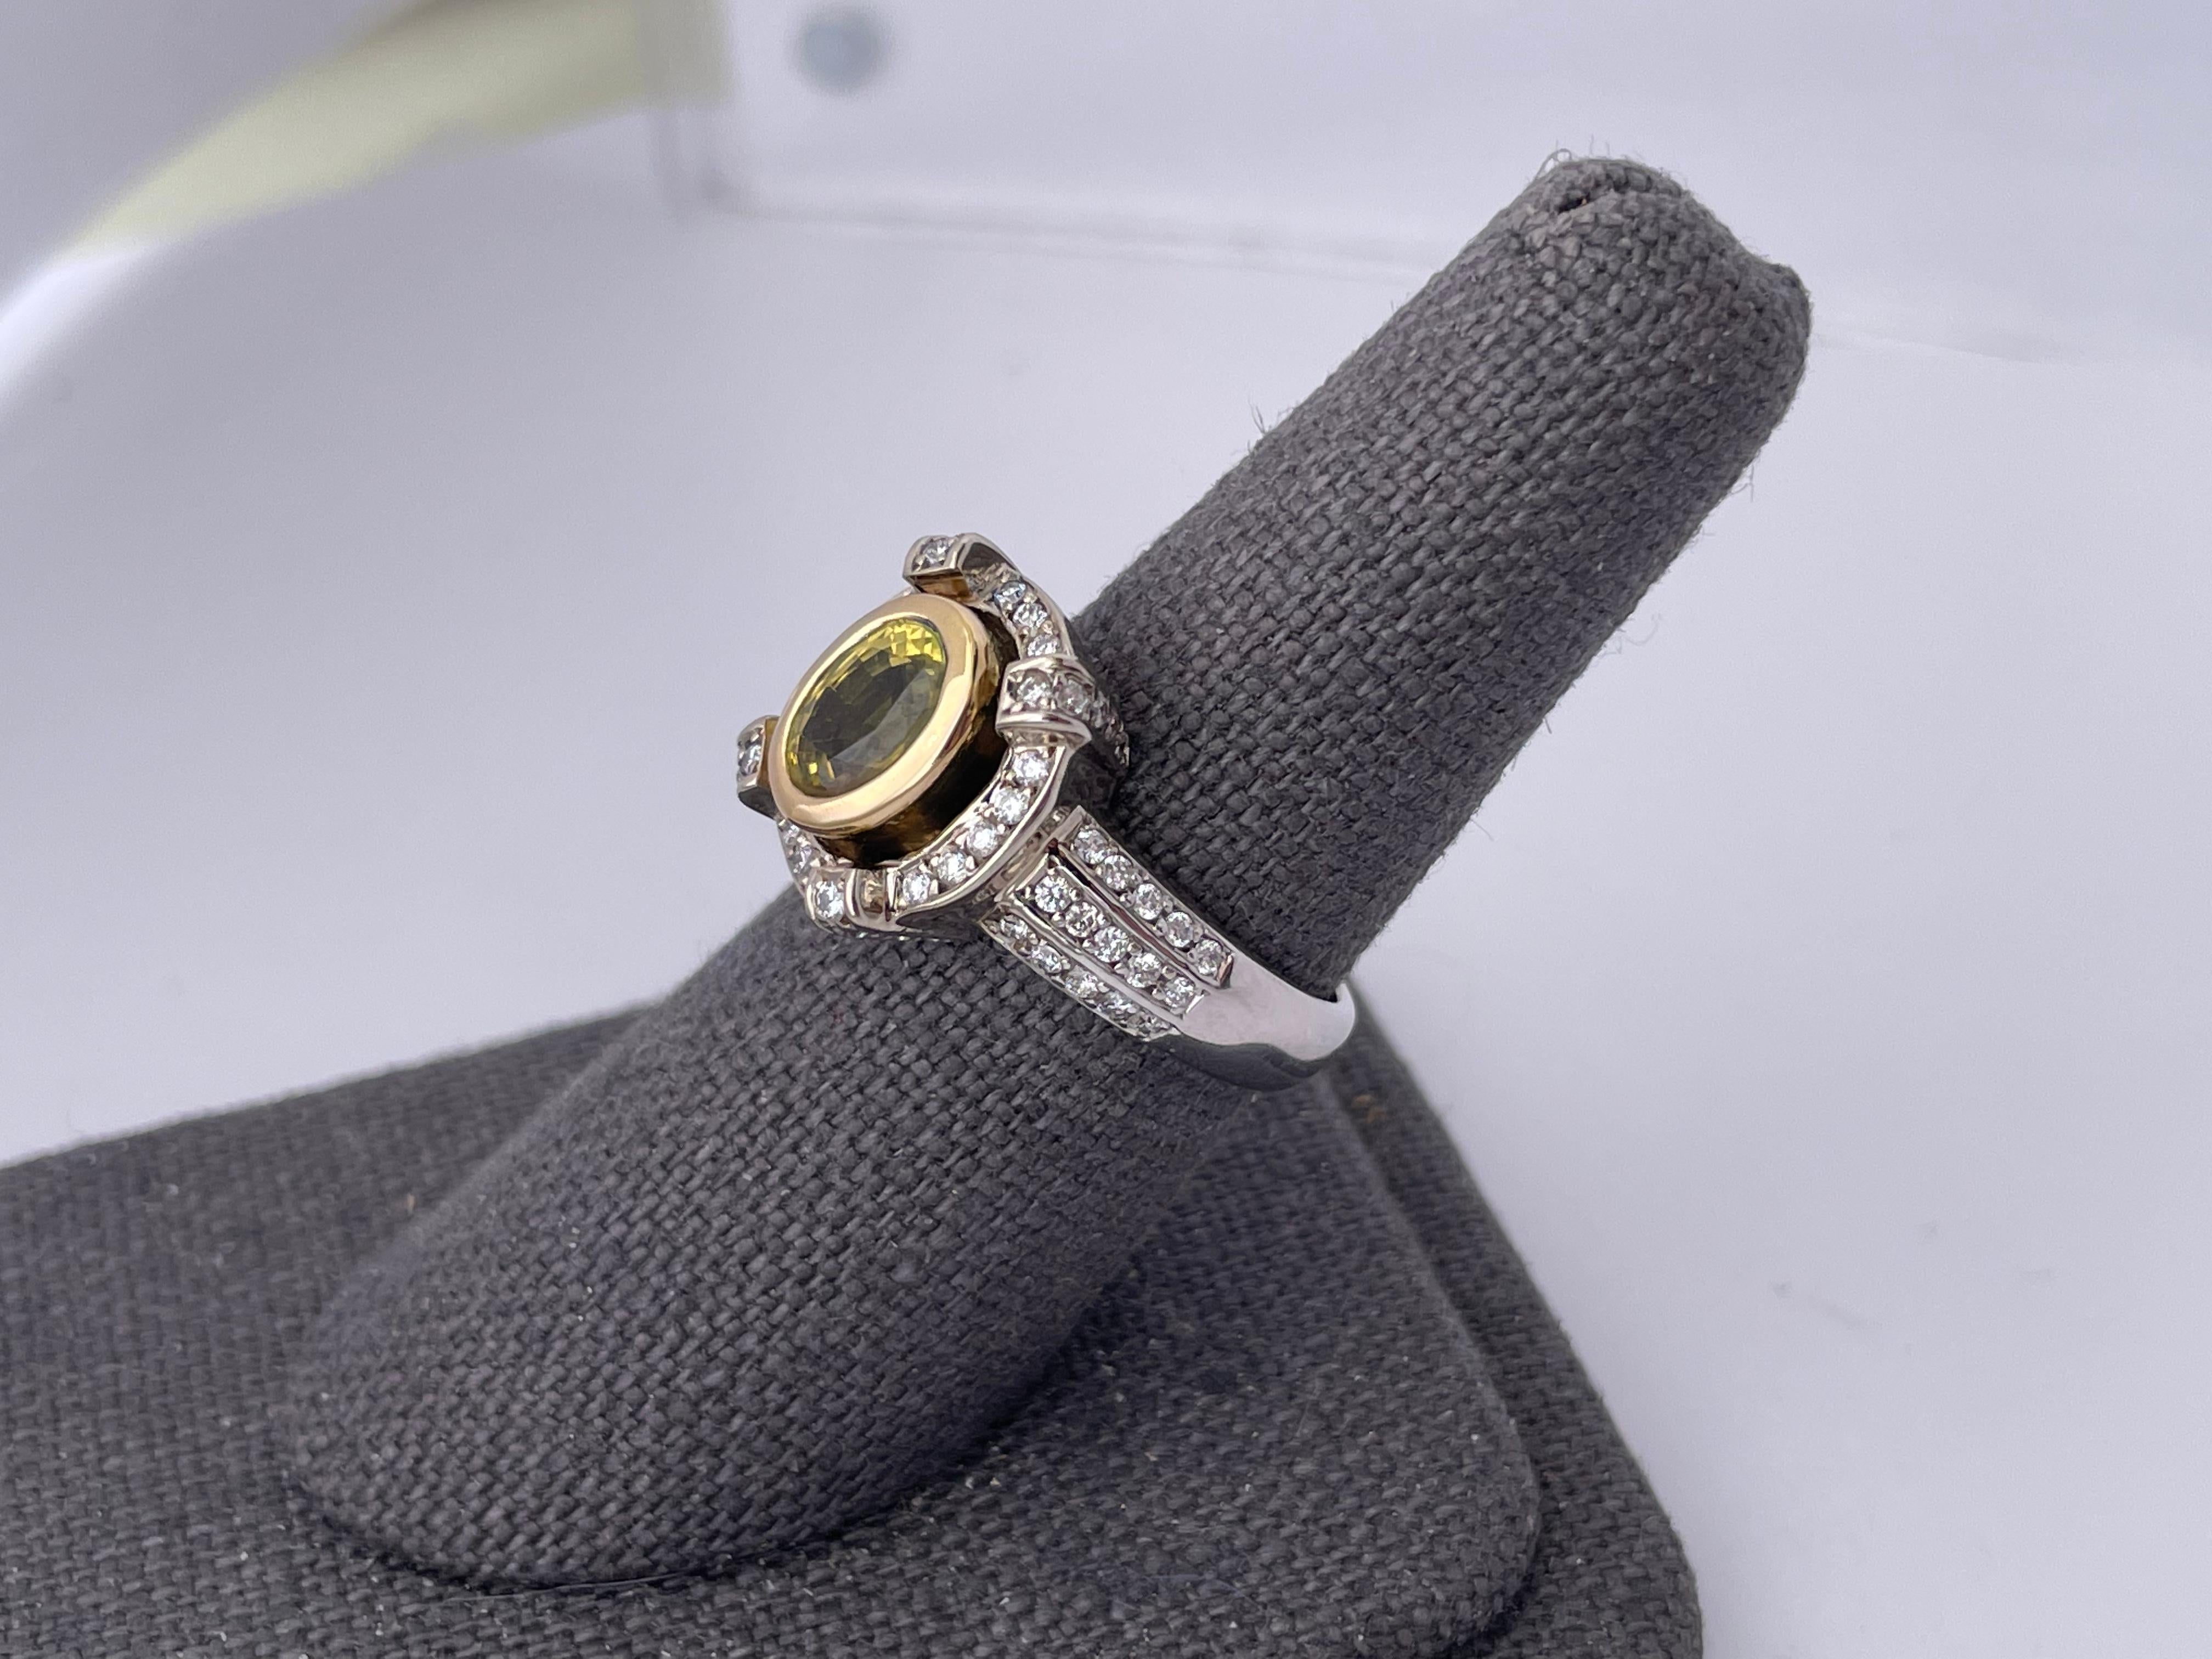 14kt White gold ring with three faux channel rows of prong set diamonds accompanied by a diamond halo with faux prongs prong set with round brilliant diamonds. The center Yellow sapphire is bezel set in yellow gold to enhance the yellow color of the